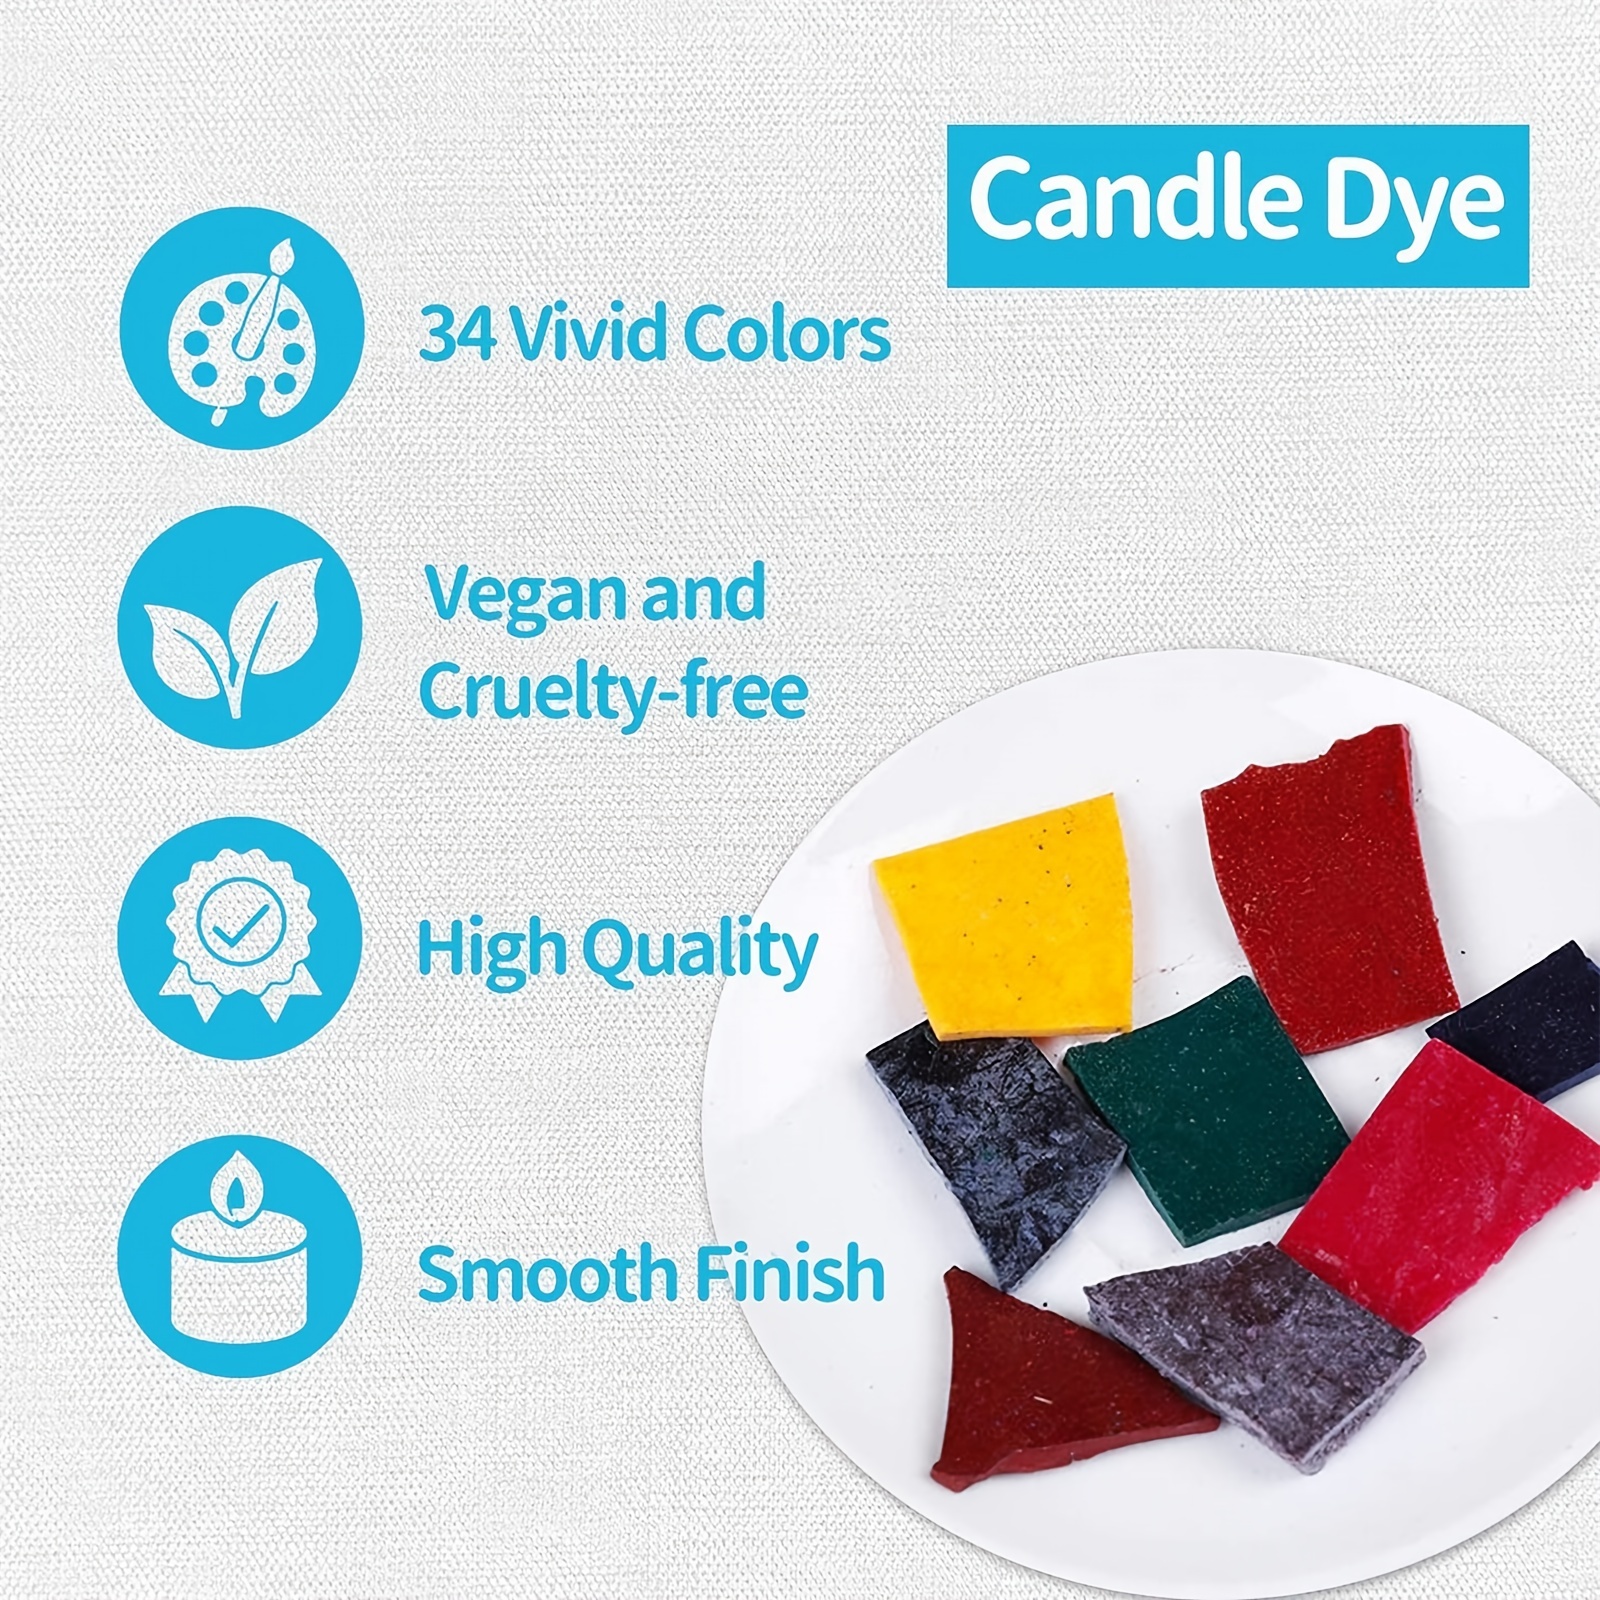 Candle Dye 34 Popular Colors Candle Wax Dye For Candle Making - 8.5oz  Candle Color Dye For Soy Wax, Safe And Natural